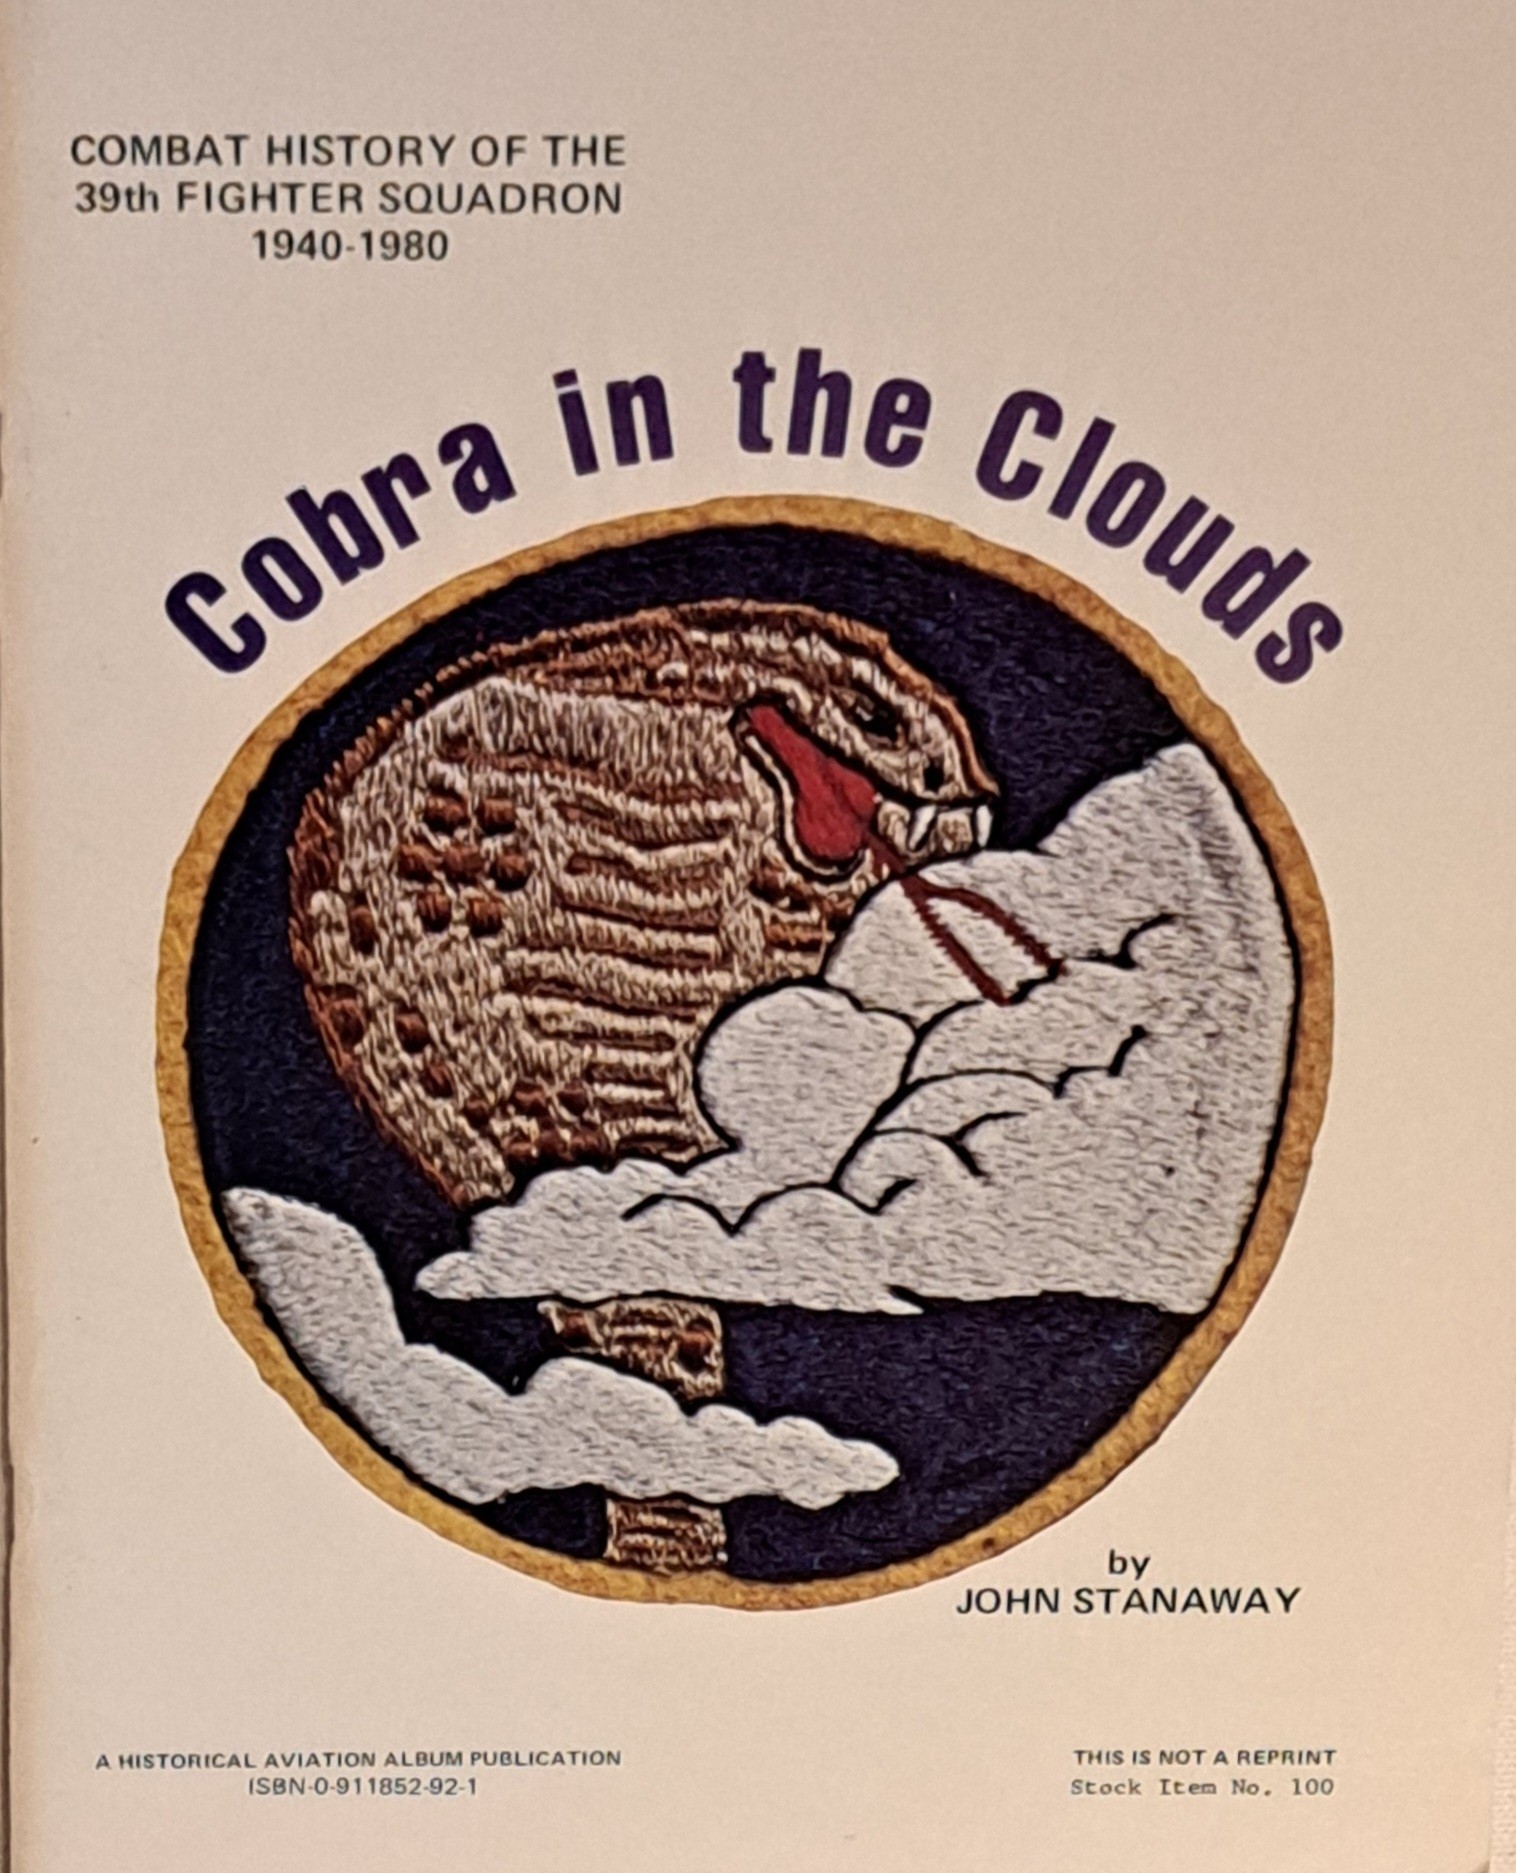 Cobra in the Clouds: 39th fighter squadron 1940-80